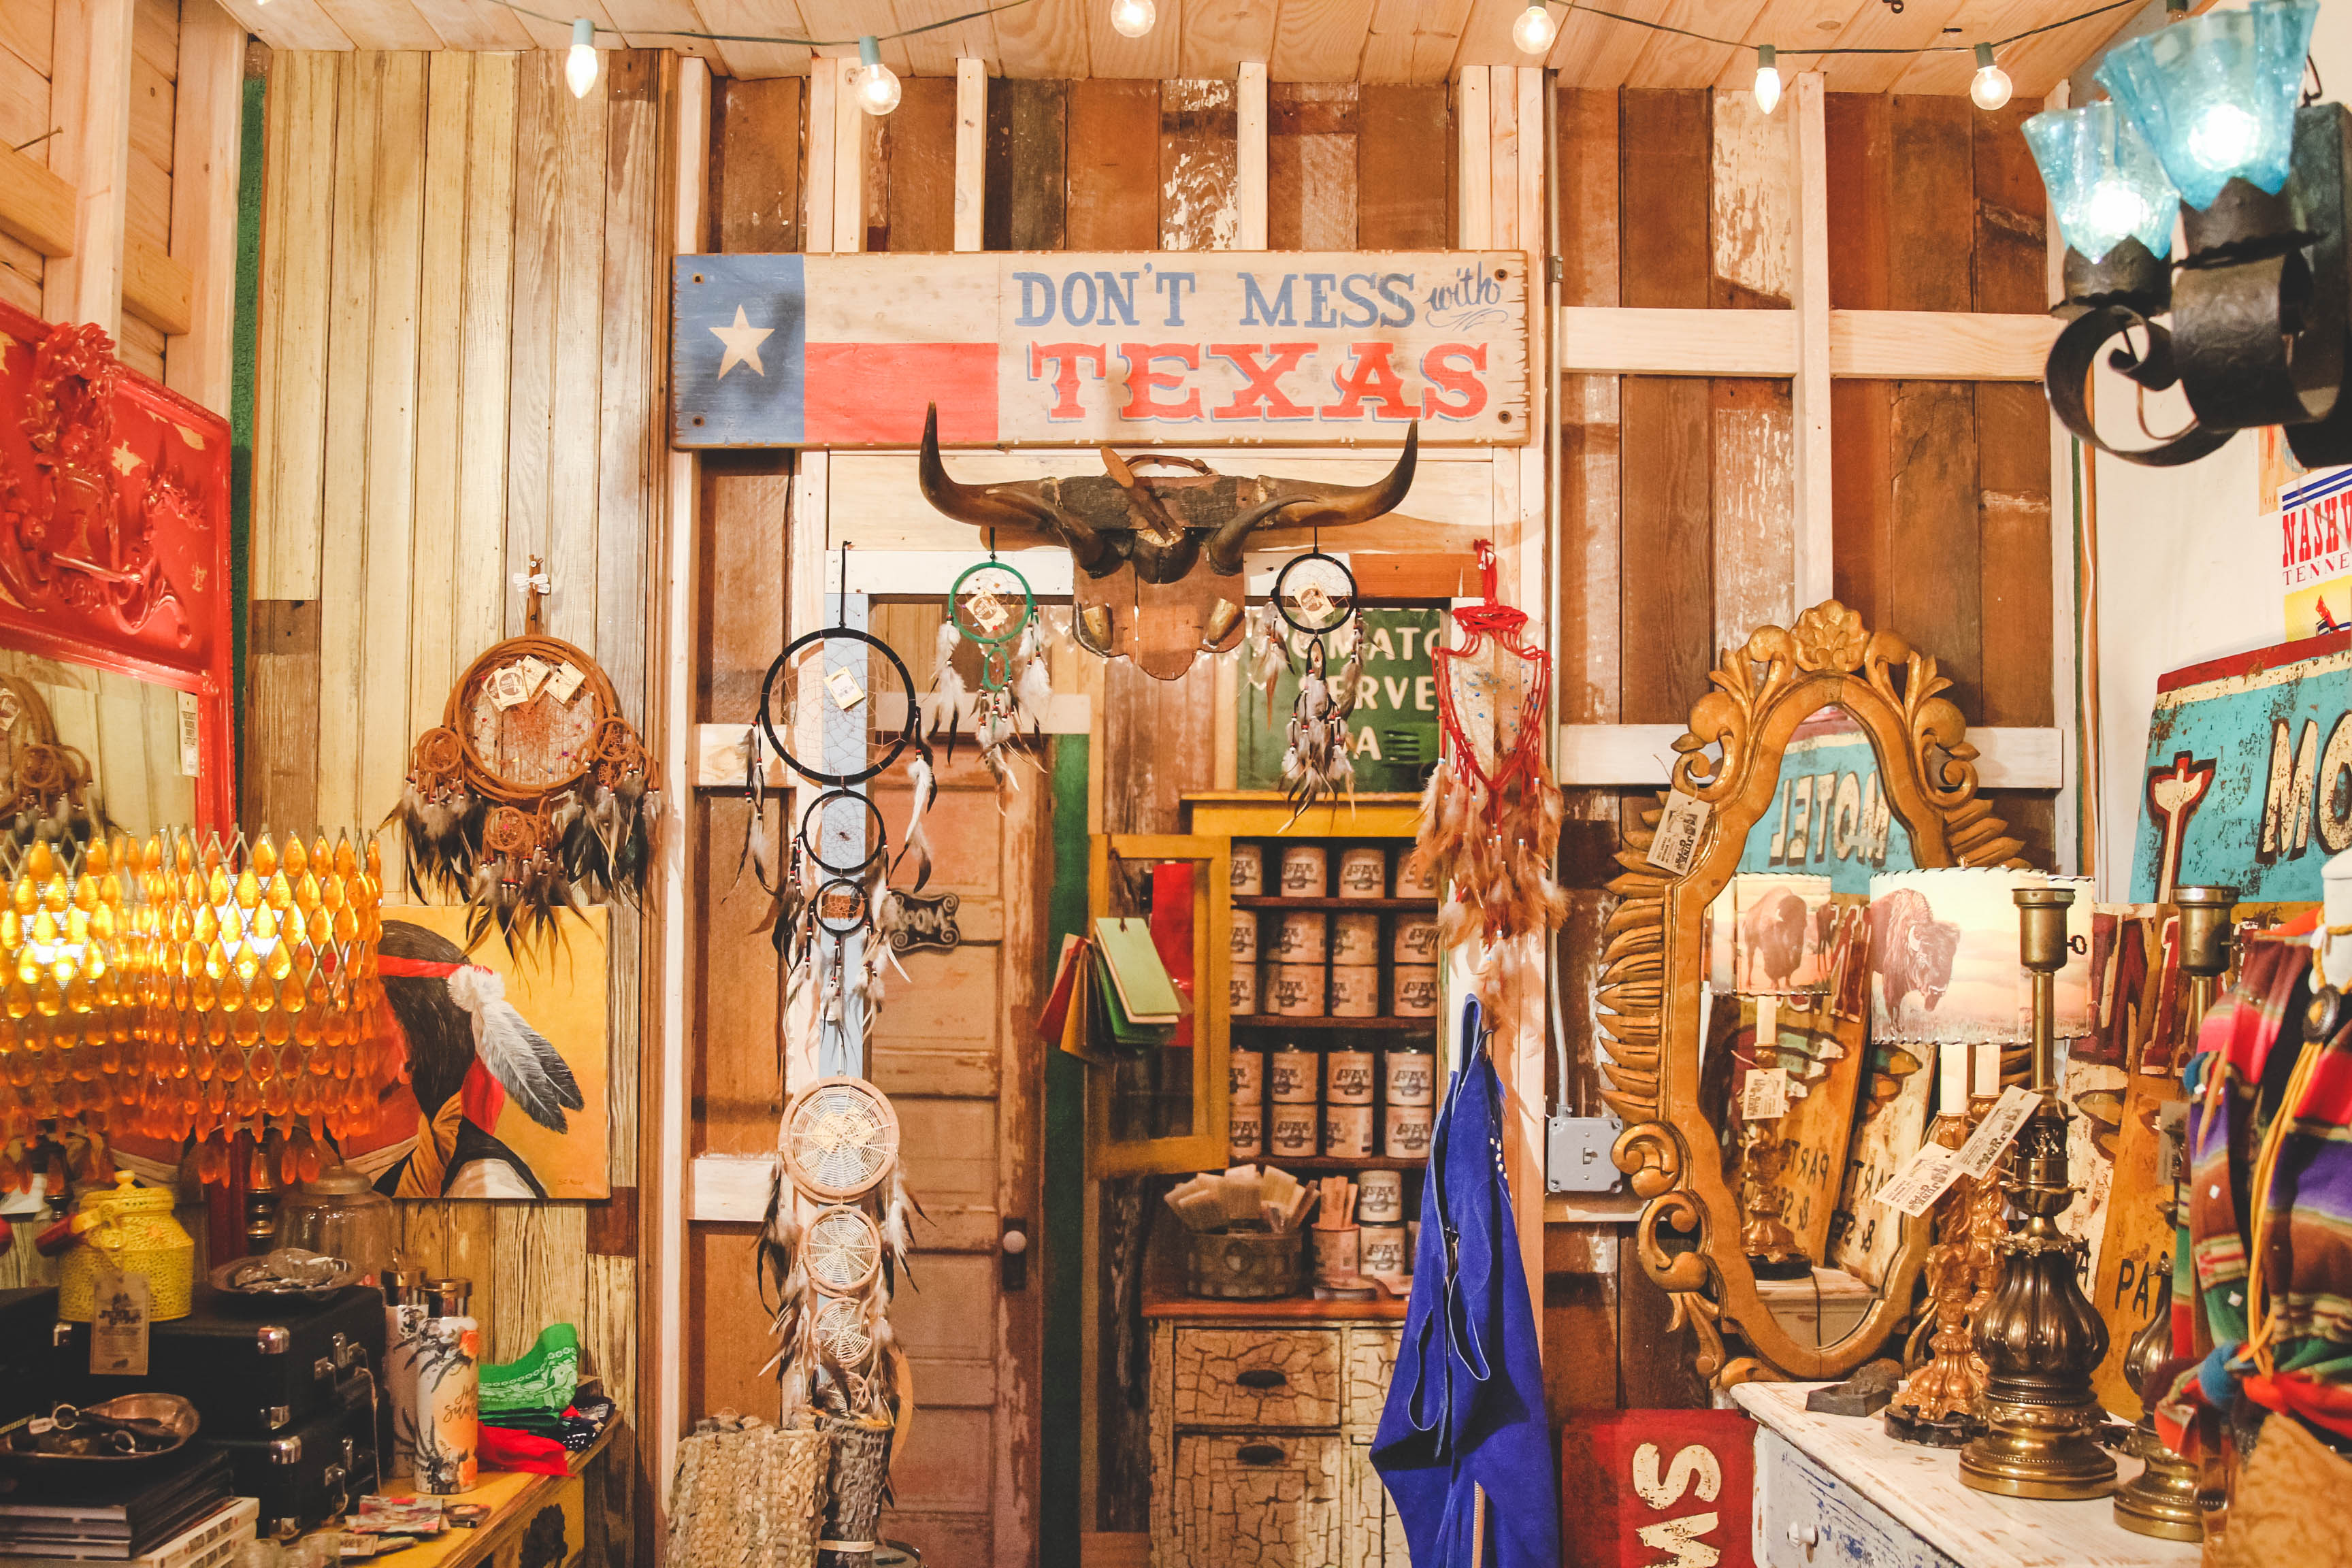 Western decor and antiques at Junk Gypsy Headquarters.